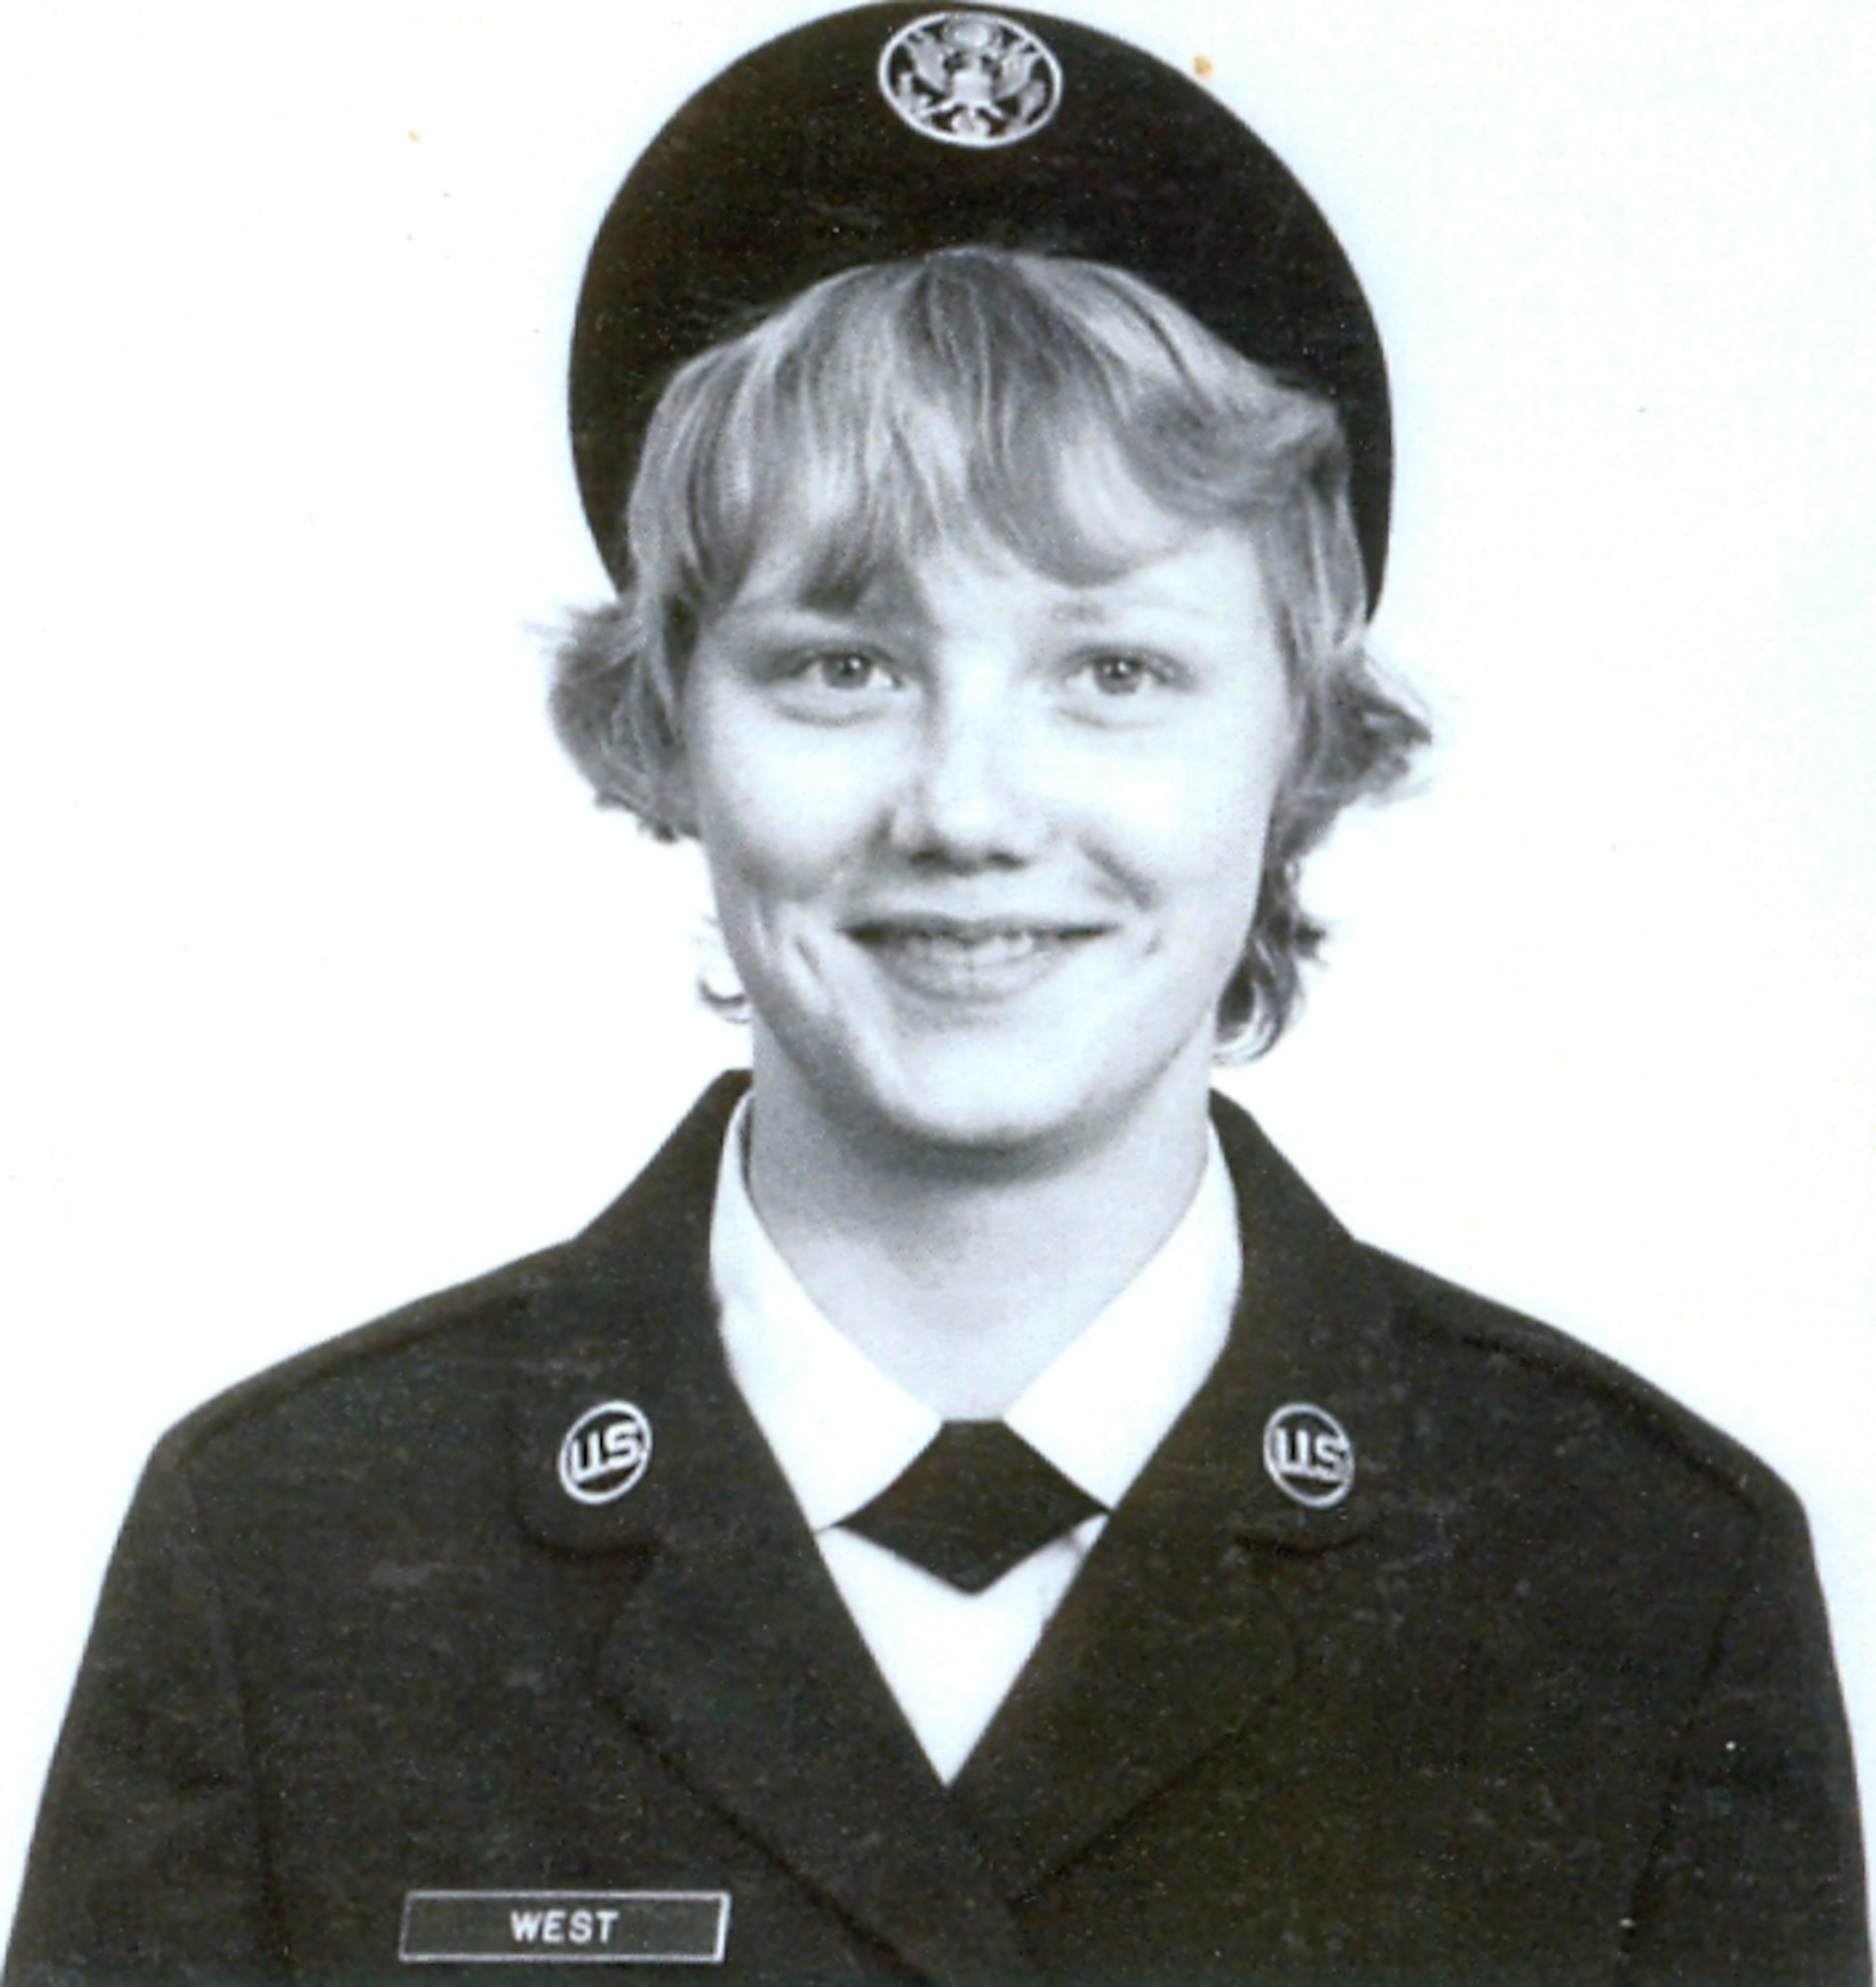 Airman Basic Brenda West sits for her official photo upon graduating from basic training at Lackland Air Force Base, Texas, in November 1974. At 18 West joined the Women’s Air Force, or WAF, which was abolished in 1976 and women were accepted into the military on much the same basis as men.  1976 was the same year in which the United States Air Force Academy began accepting female cadets. (Courtesy photo)